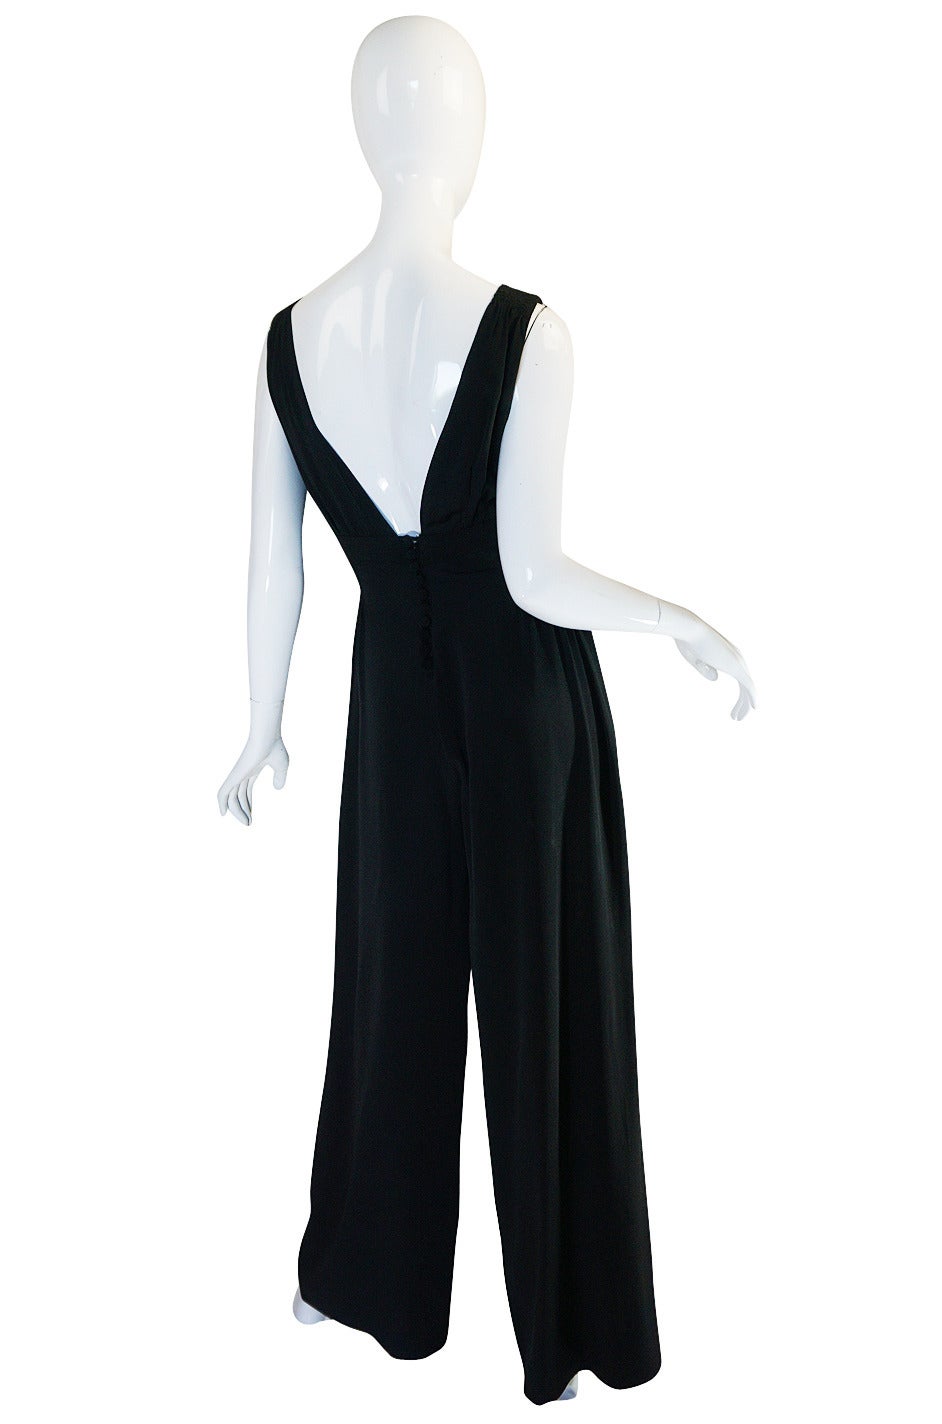 This fabulous jumpsuit by one of my favorite of the British labels - the iconic and early Quorum label where Ossie Clark first began designing! Designs from this label ruled during the mid-sixties British scene and have a sexy, easy way about them.